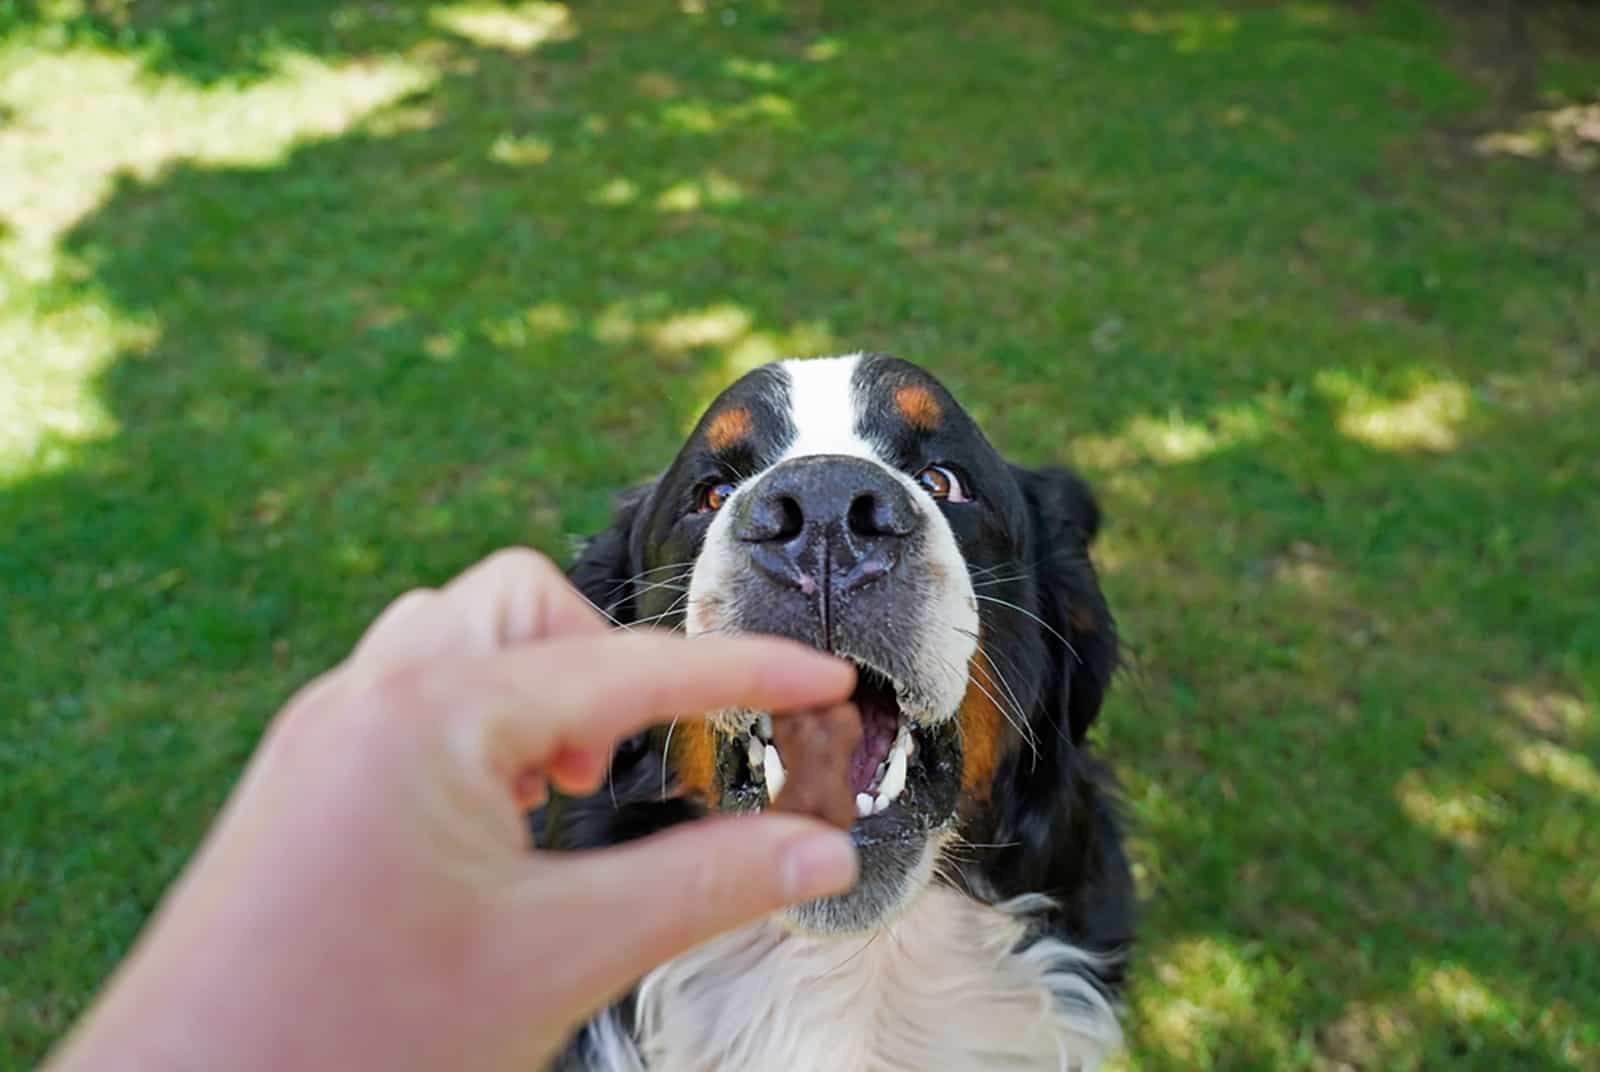 bernese mountain dog getting a treat from his owner